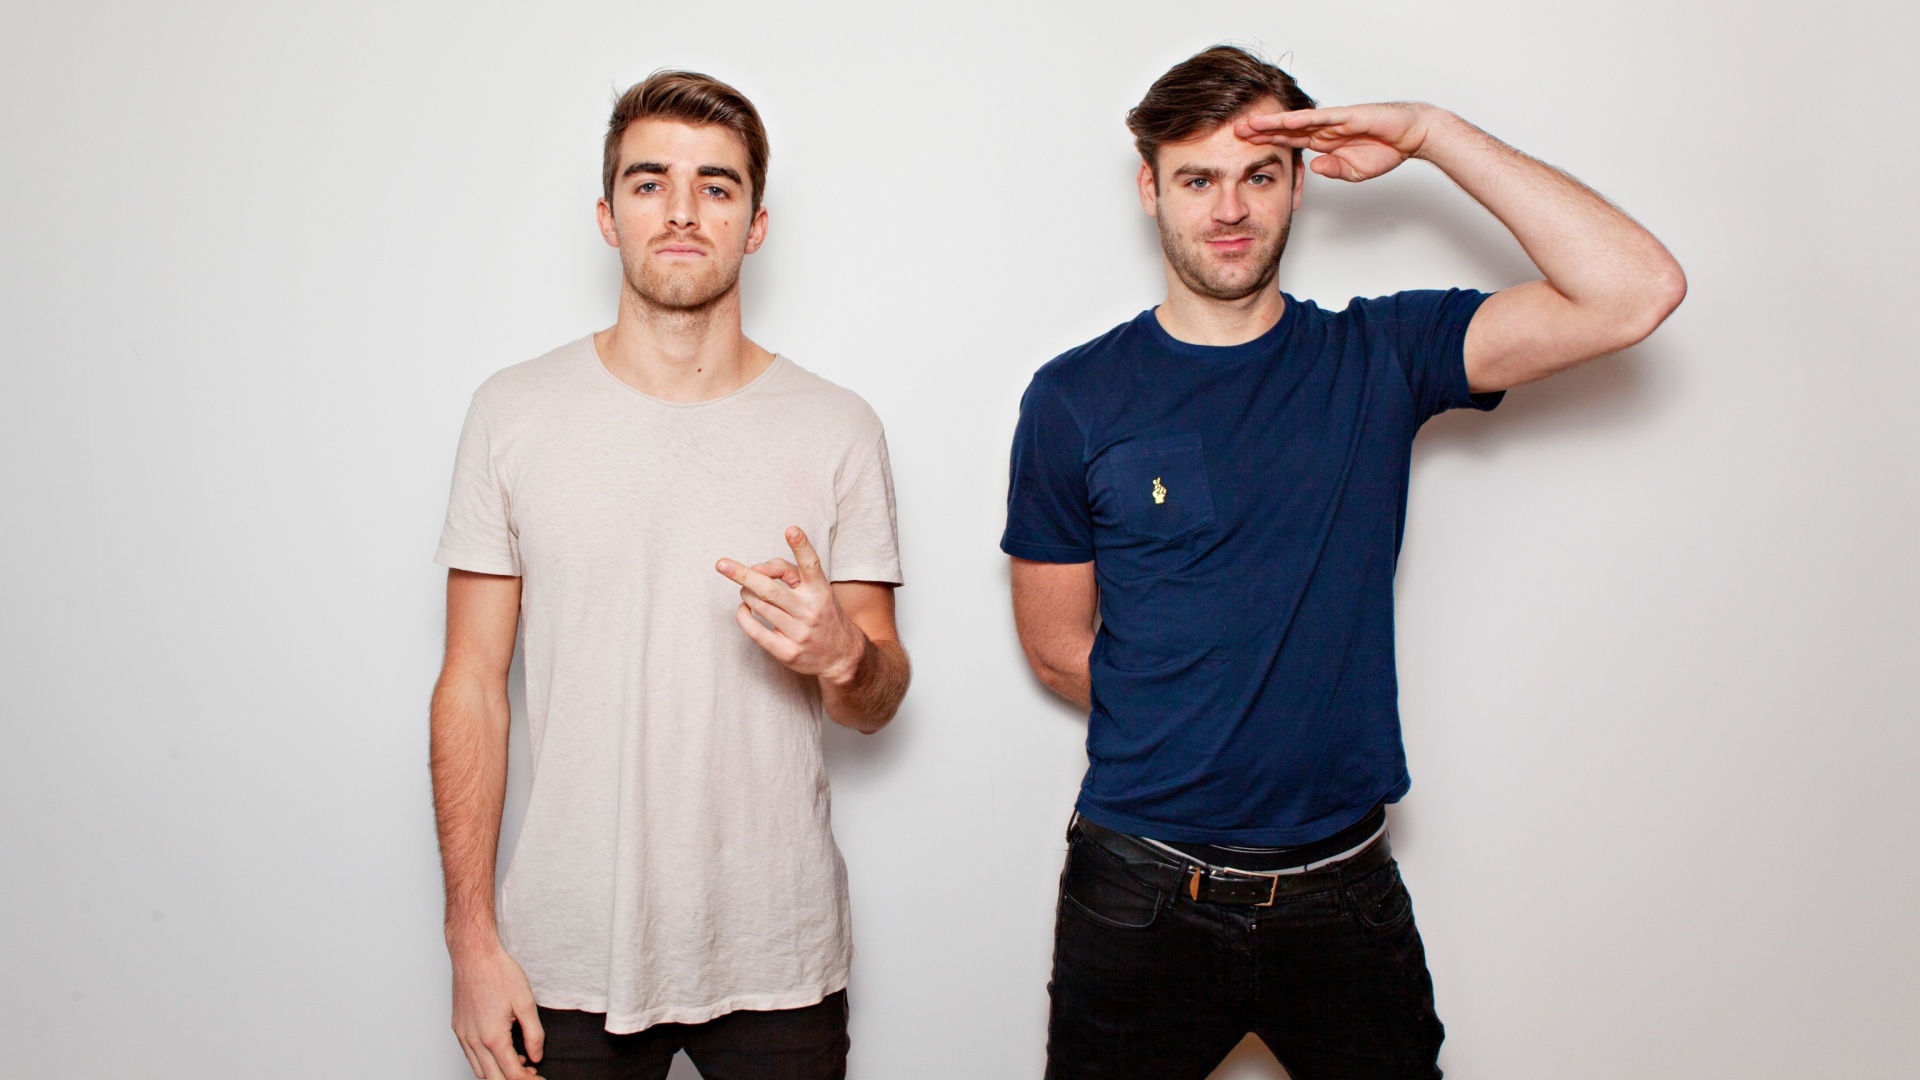 The Chainsmokers with Andrew Taggart and Alex Pall wallpaper 1920x1080